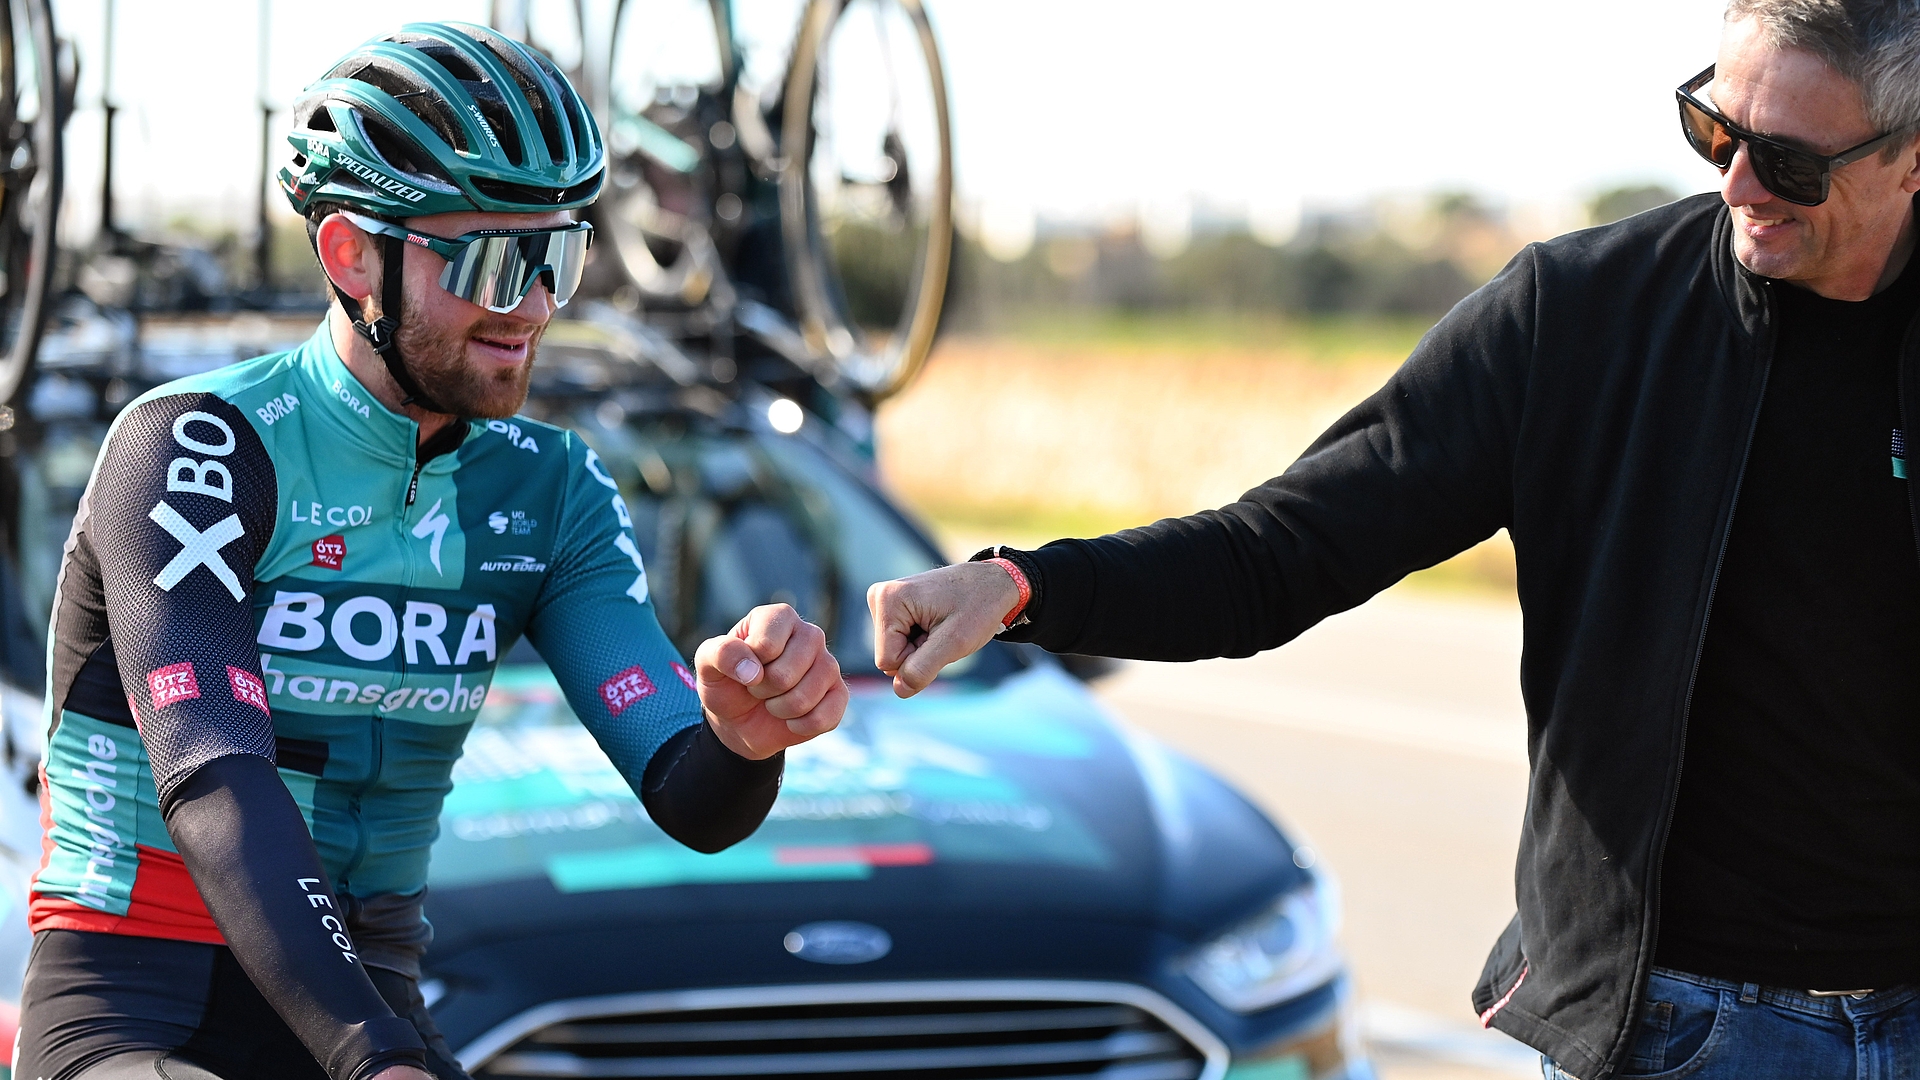 What drives the professional cyclists on the BORA – hansgrohe team?